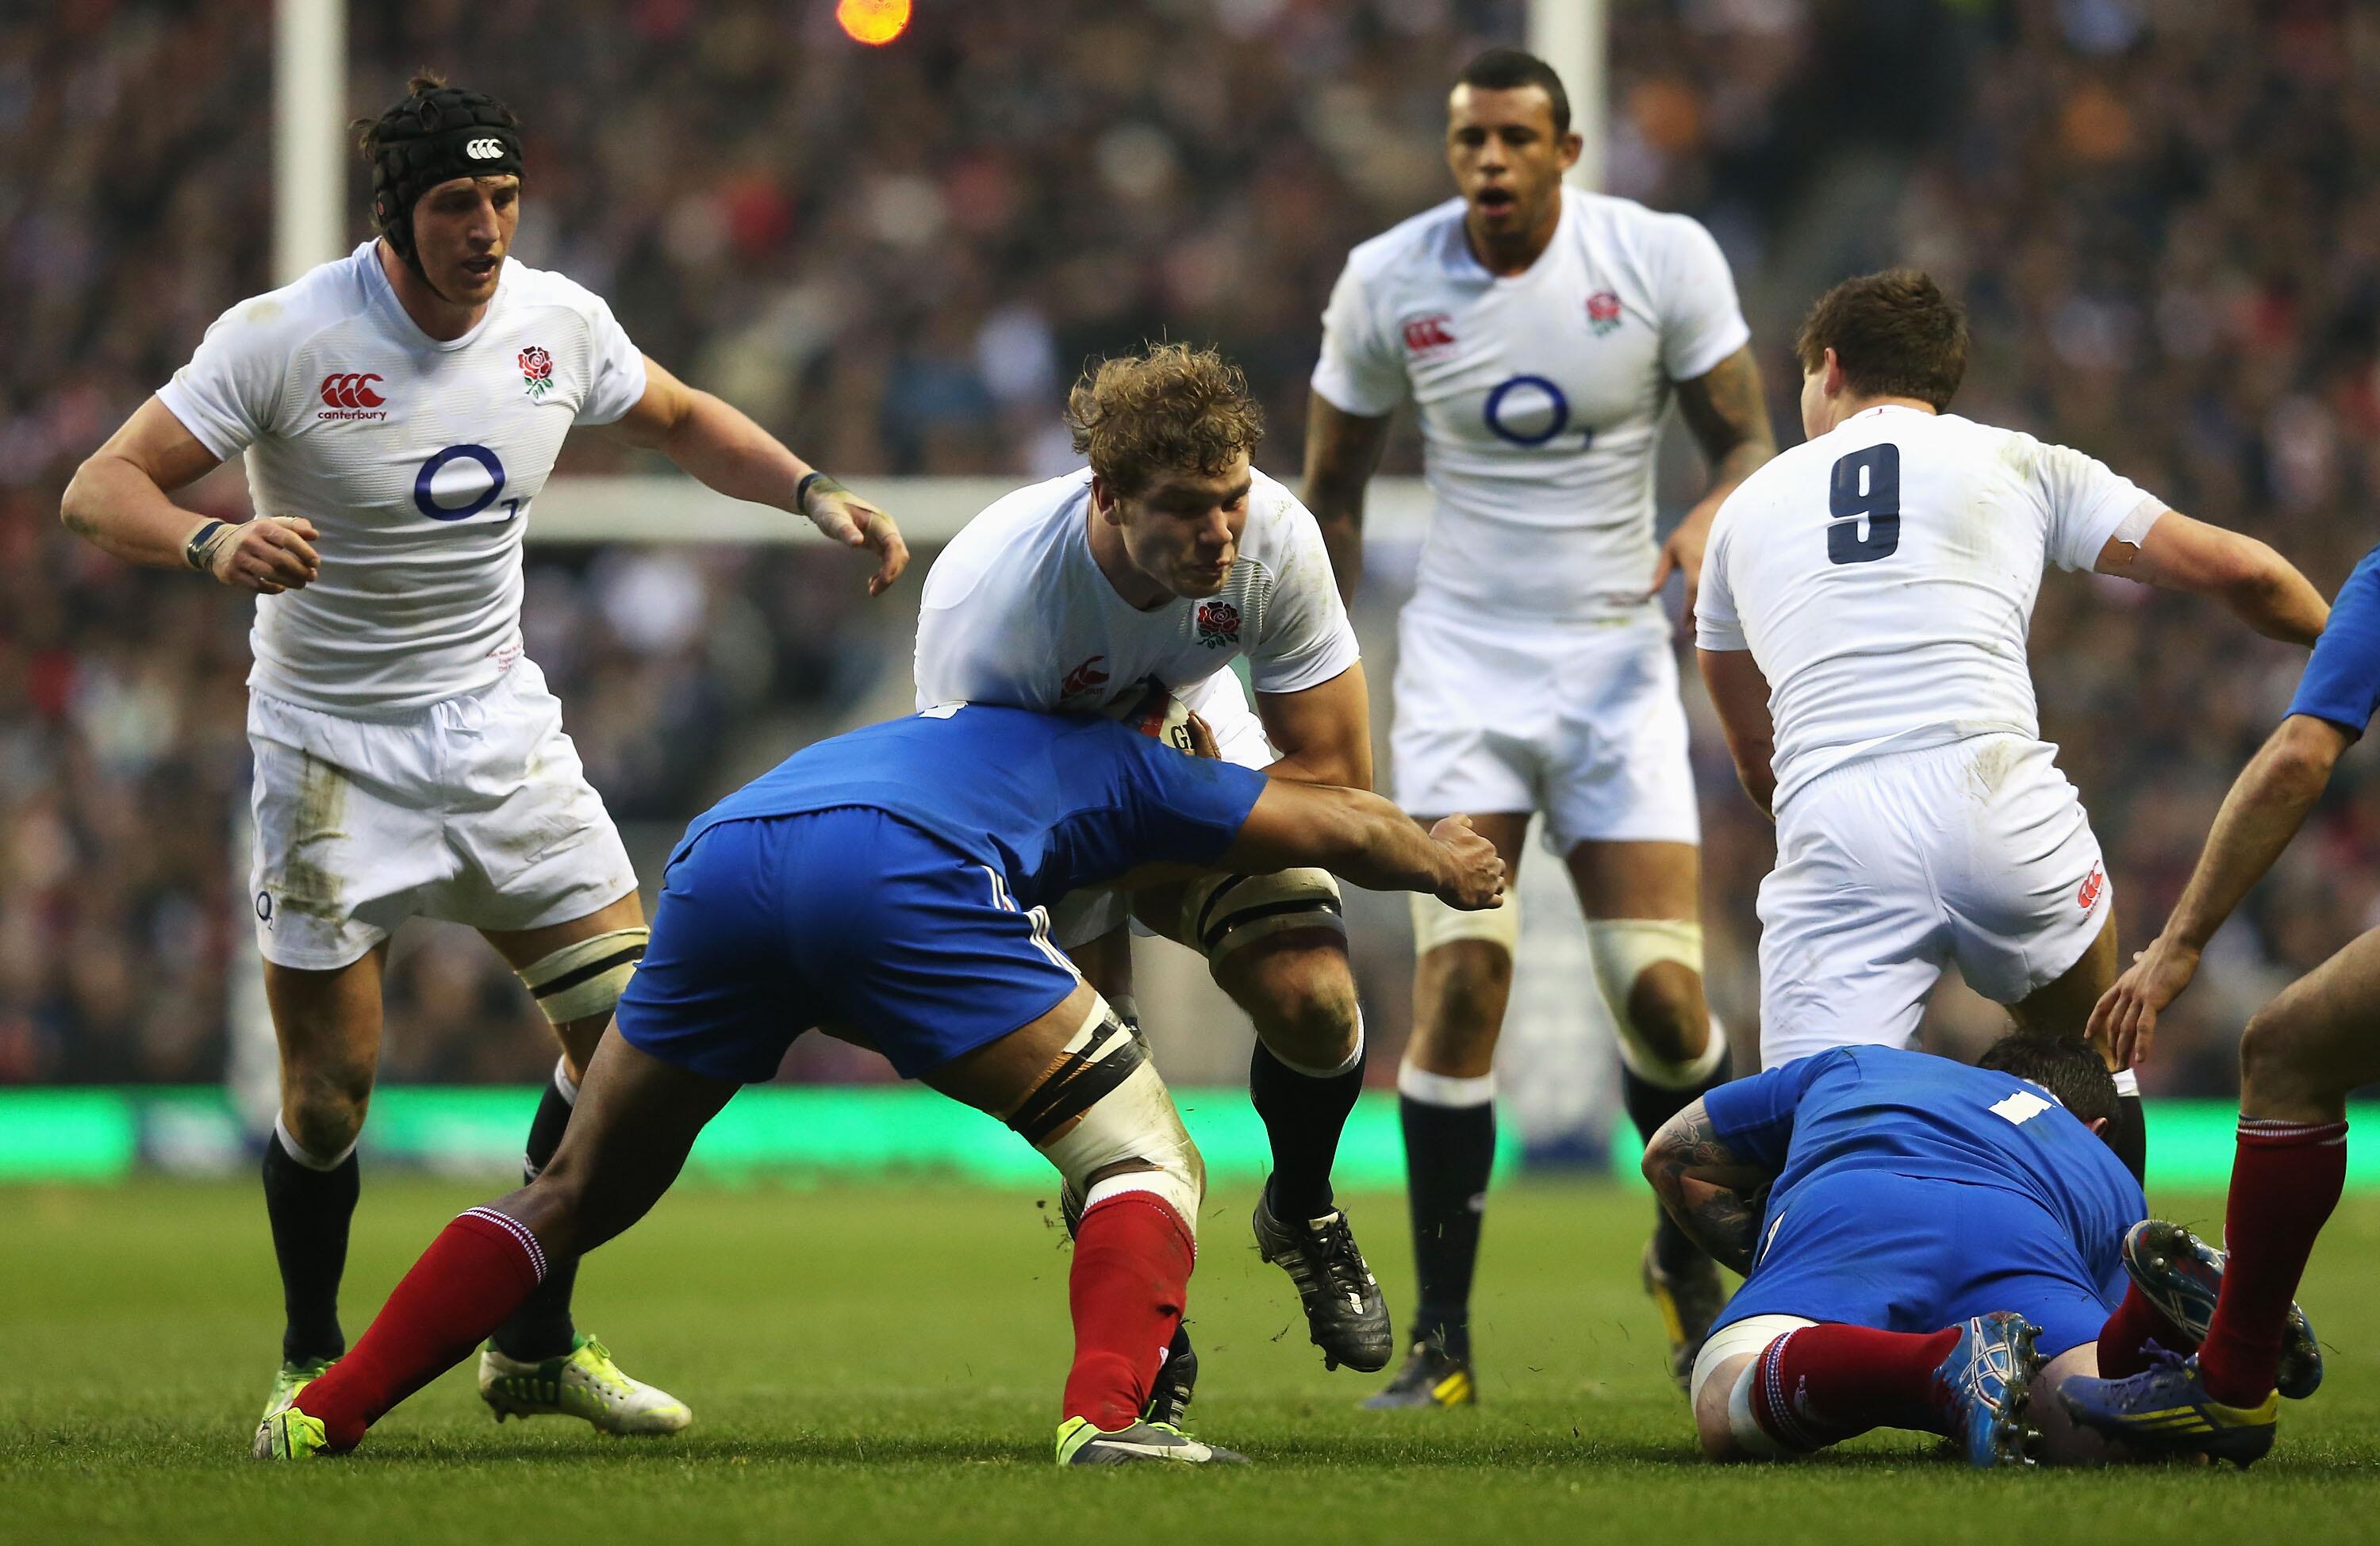 Guinness GB on X: A winning start by England #rbs6nations